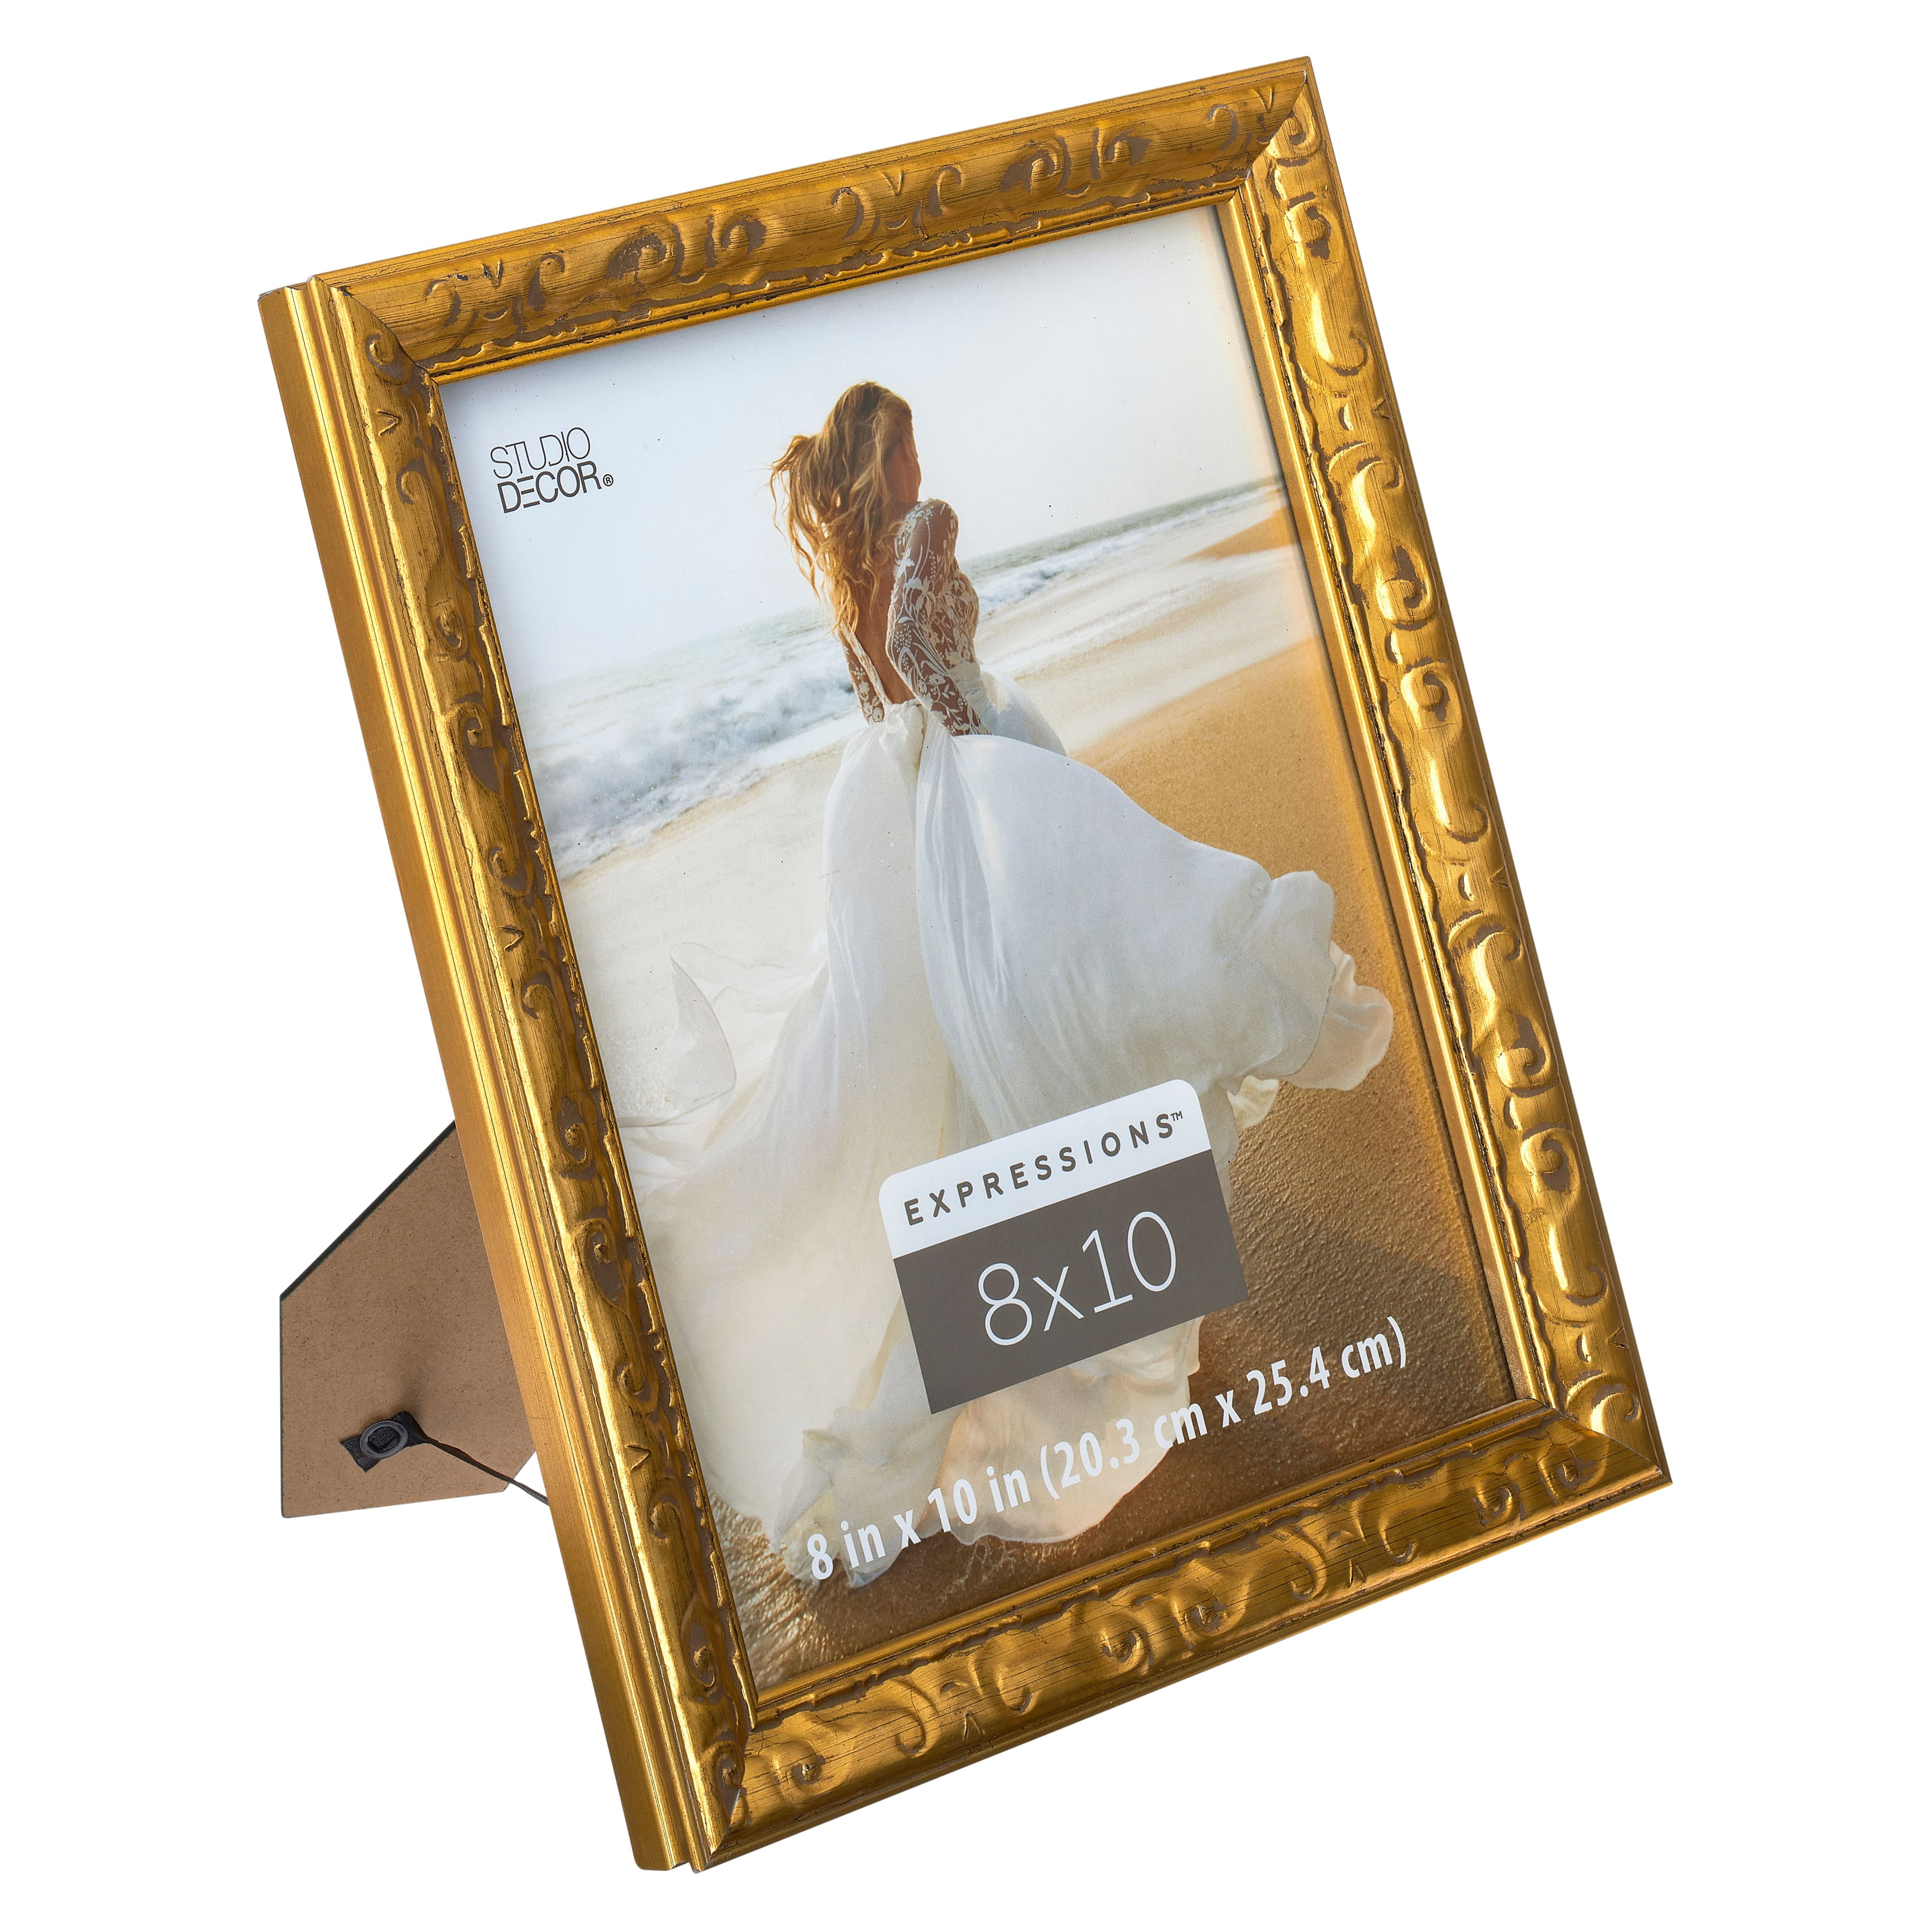 Antique Gold Ornate 4 x 6 Frame, Expressions™ by Studio Décor